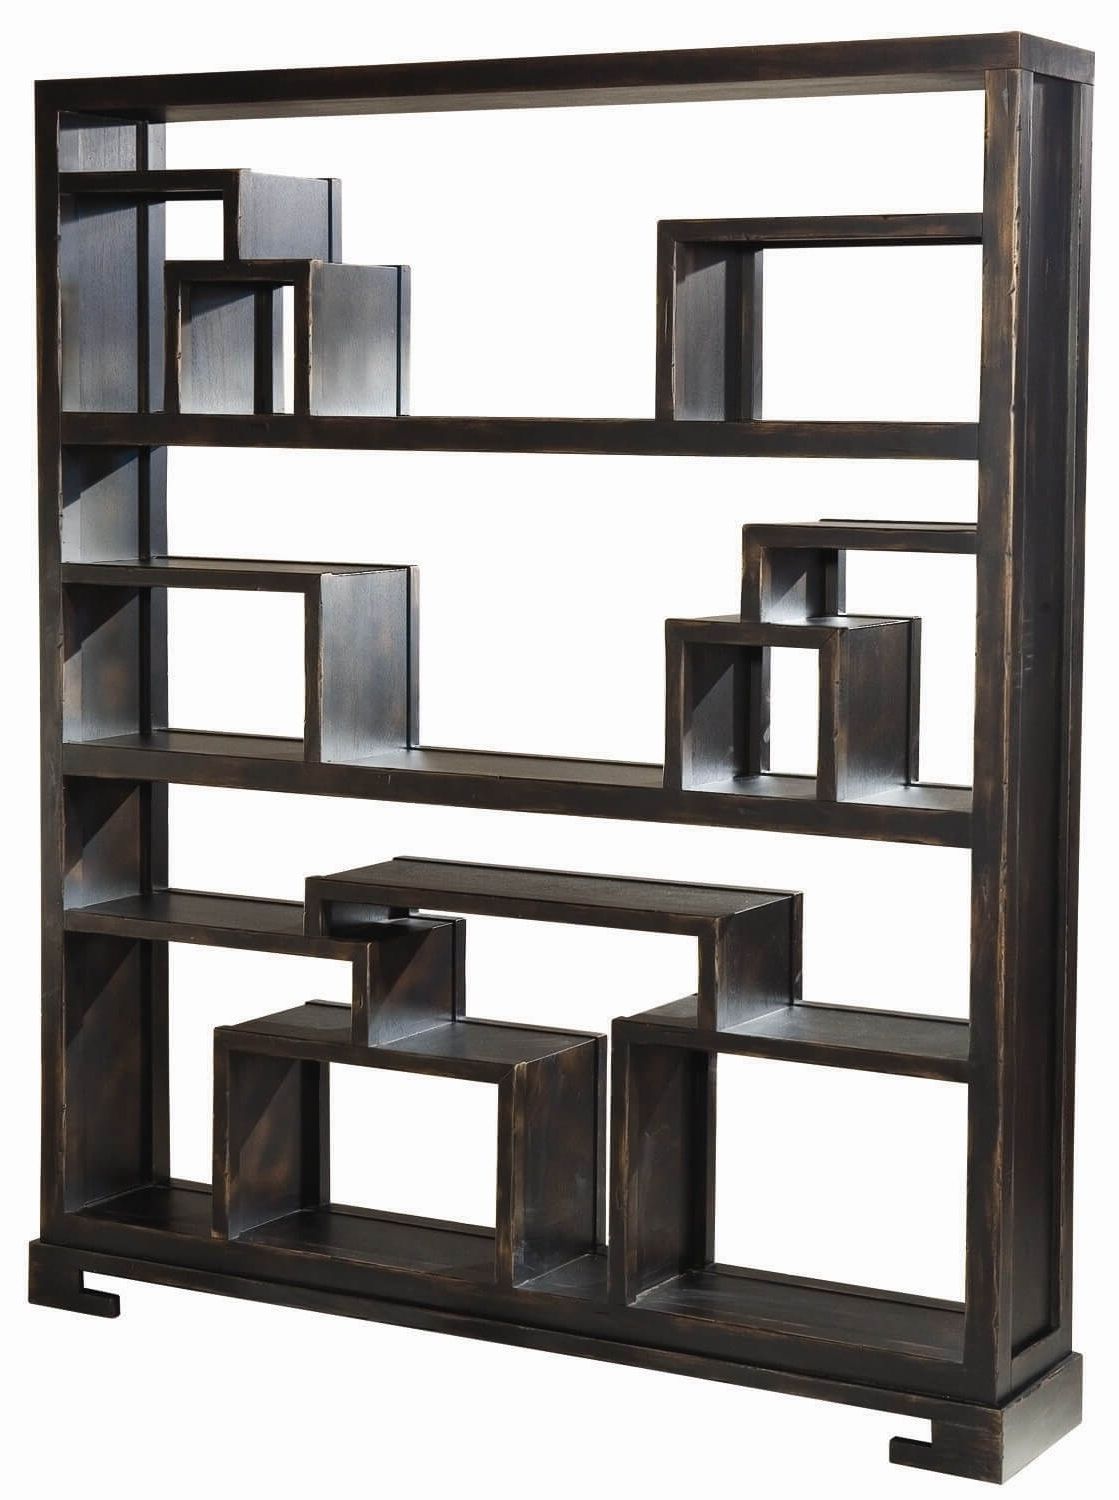 Backless Bookshelves Intended For Latest 17 Types Of Cube Shelves, Bookcases & Storage Options (View 1 of 15)